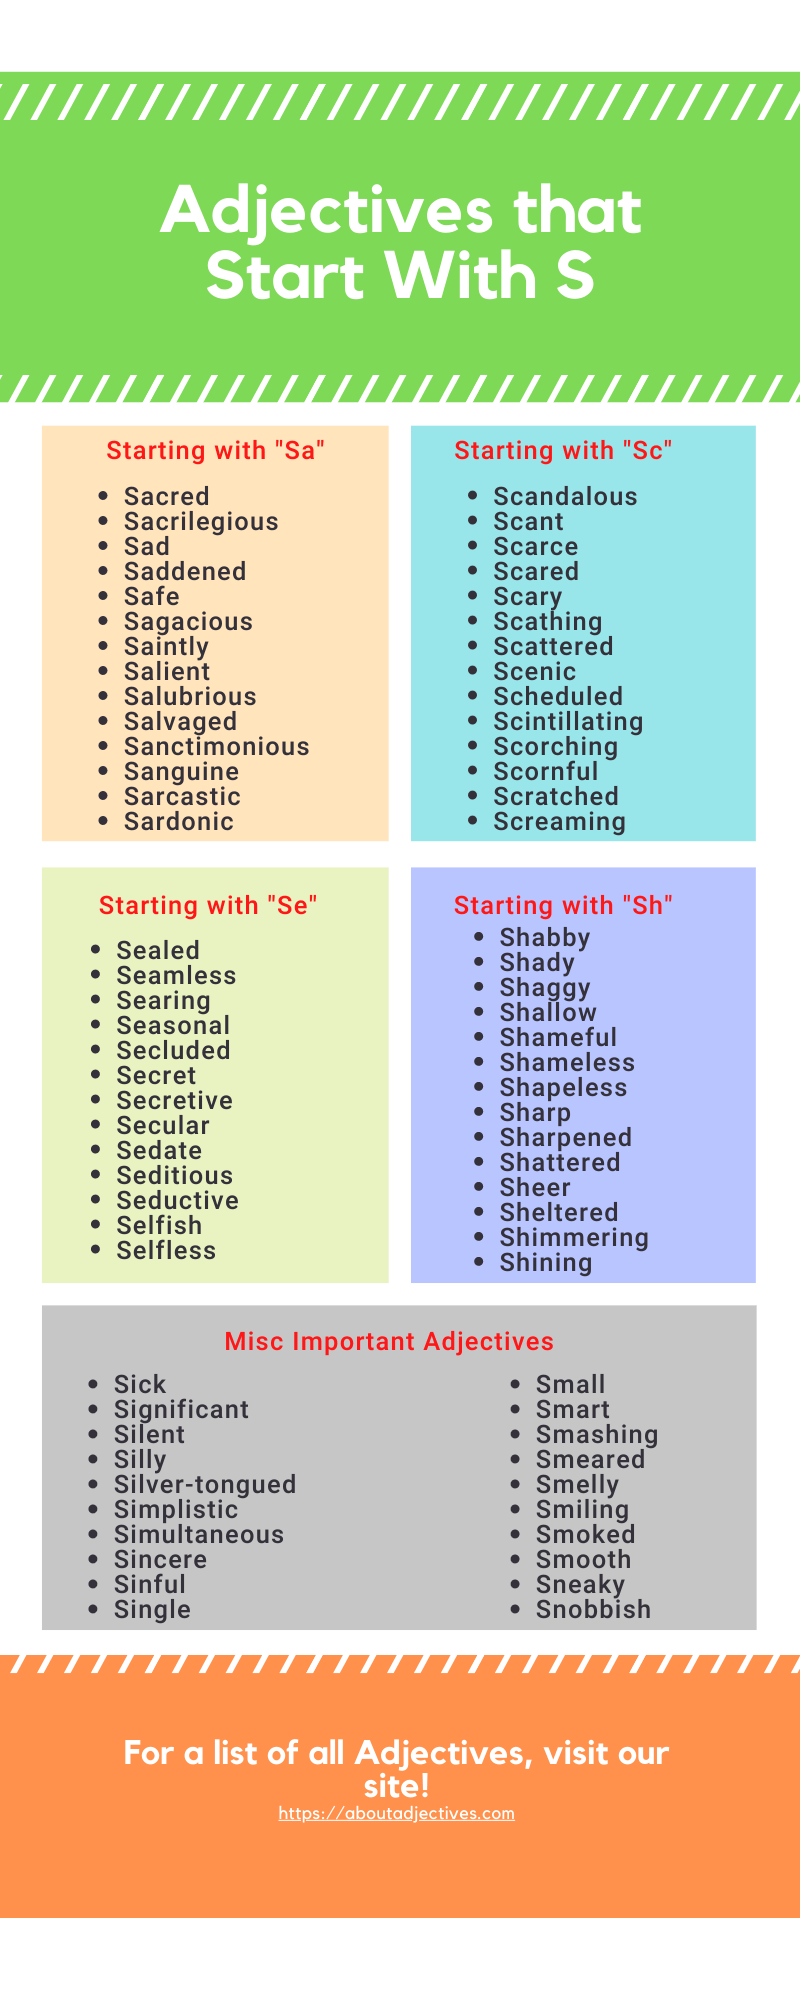 Adjectives that start with S